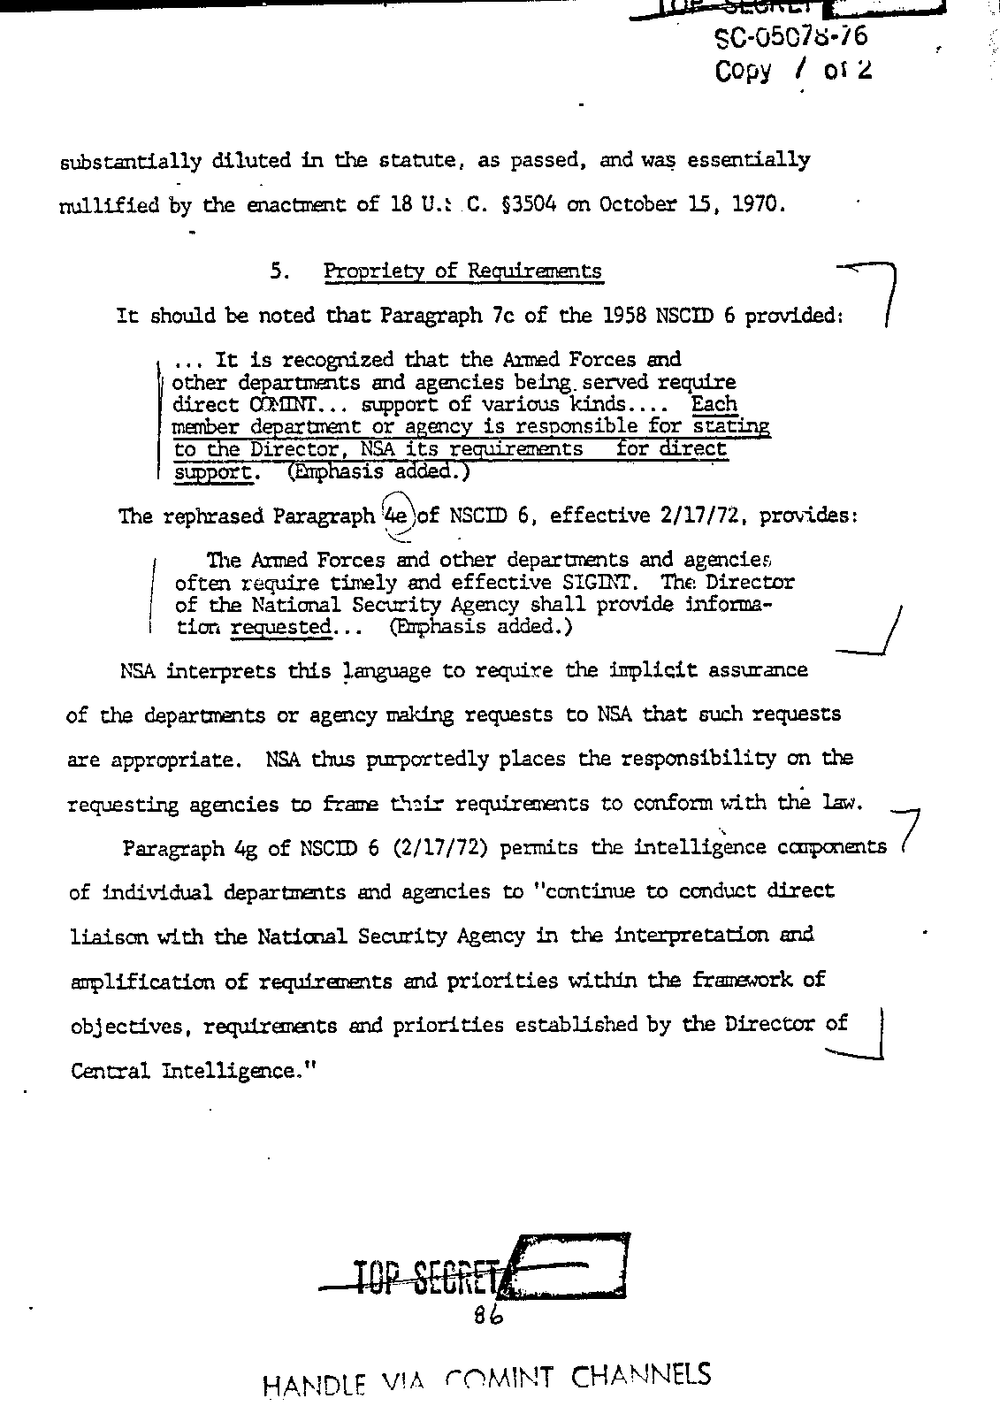 Page 94 from Report on Inquiry Into CIA Related Electronic Surveillance Activities